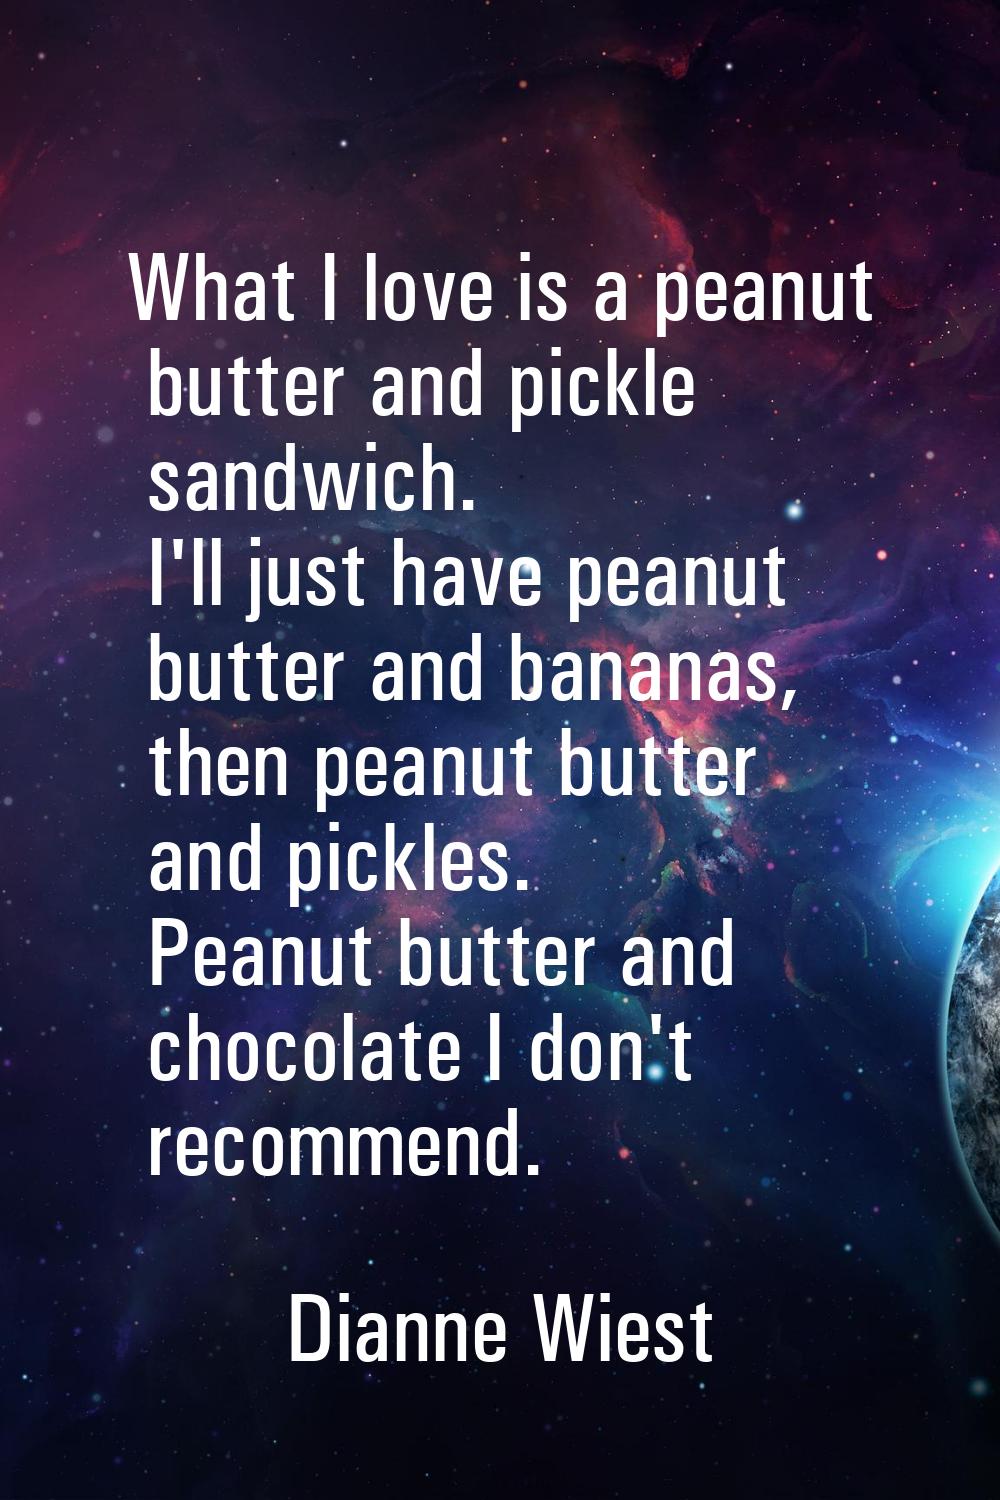 What I love is a peanut butter and pickle sandwich. I'll just have peanut butter and bananas, then 